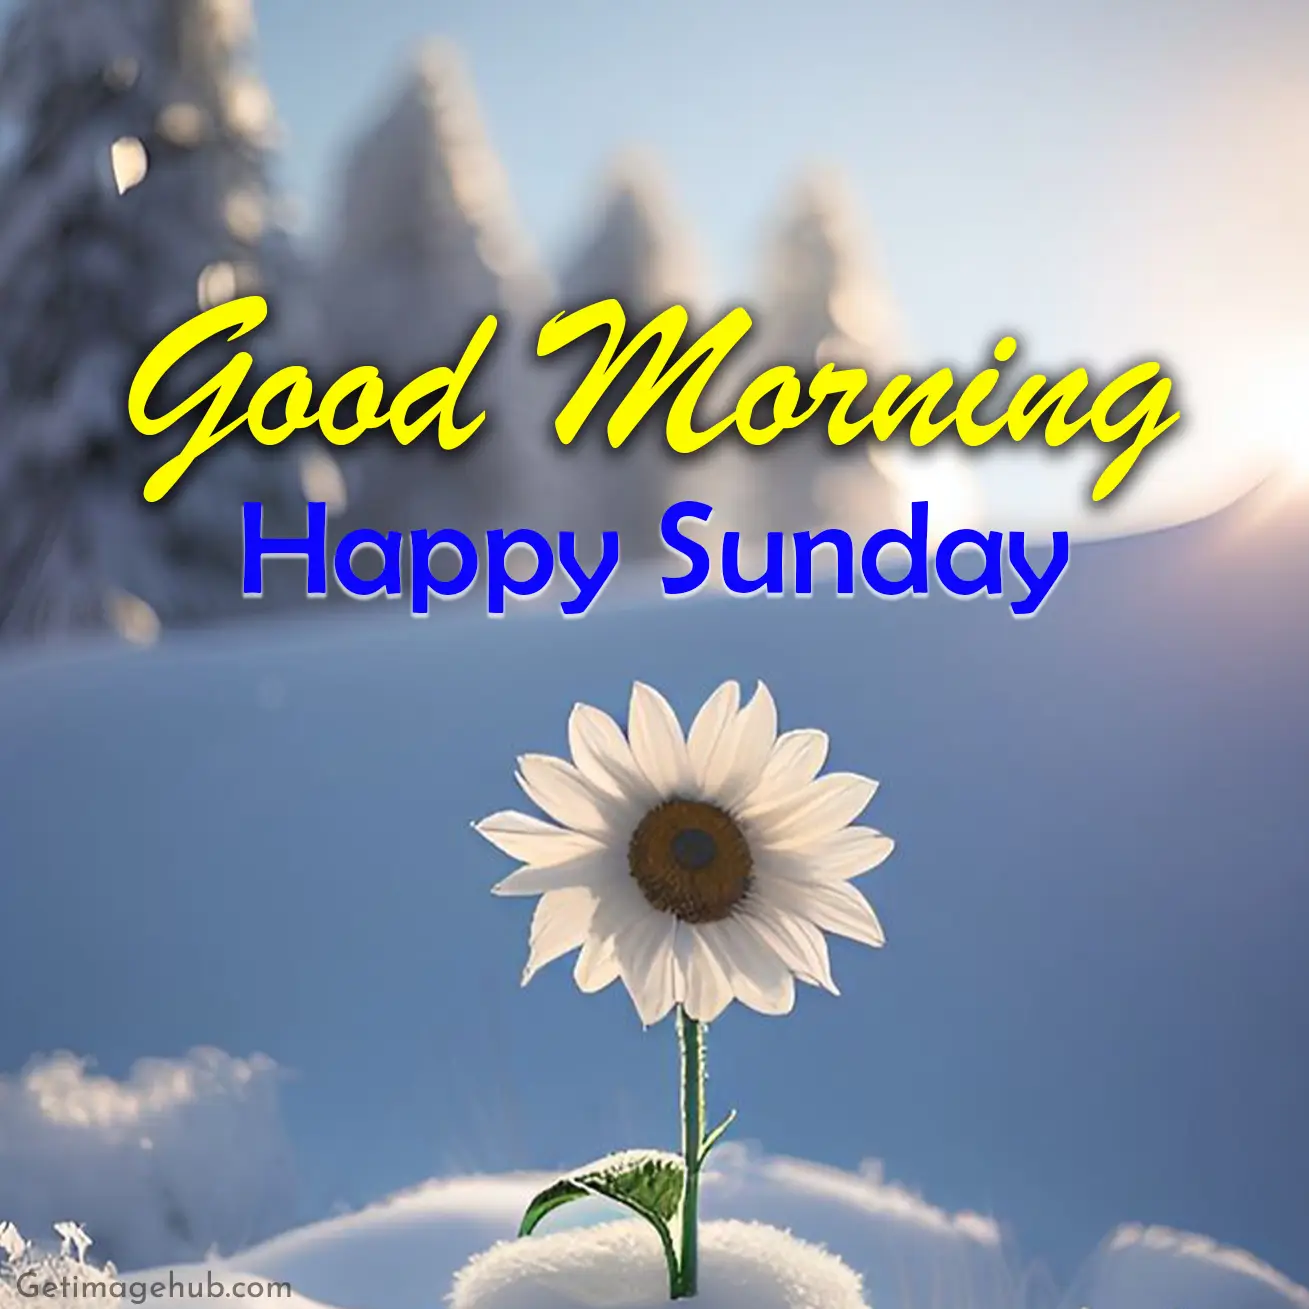 100+ Good Morning Happy Sunday Images, Wishes and Picture